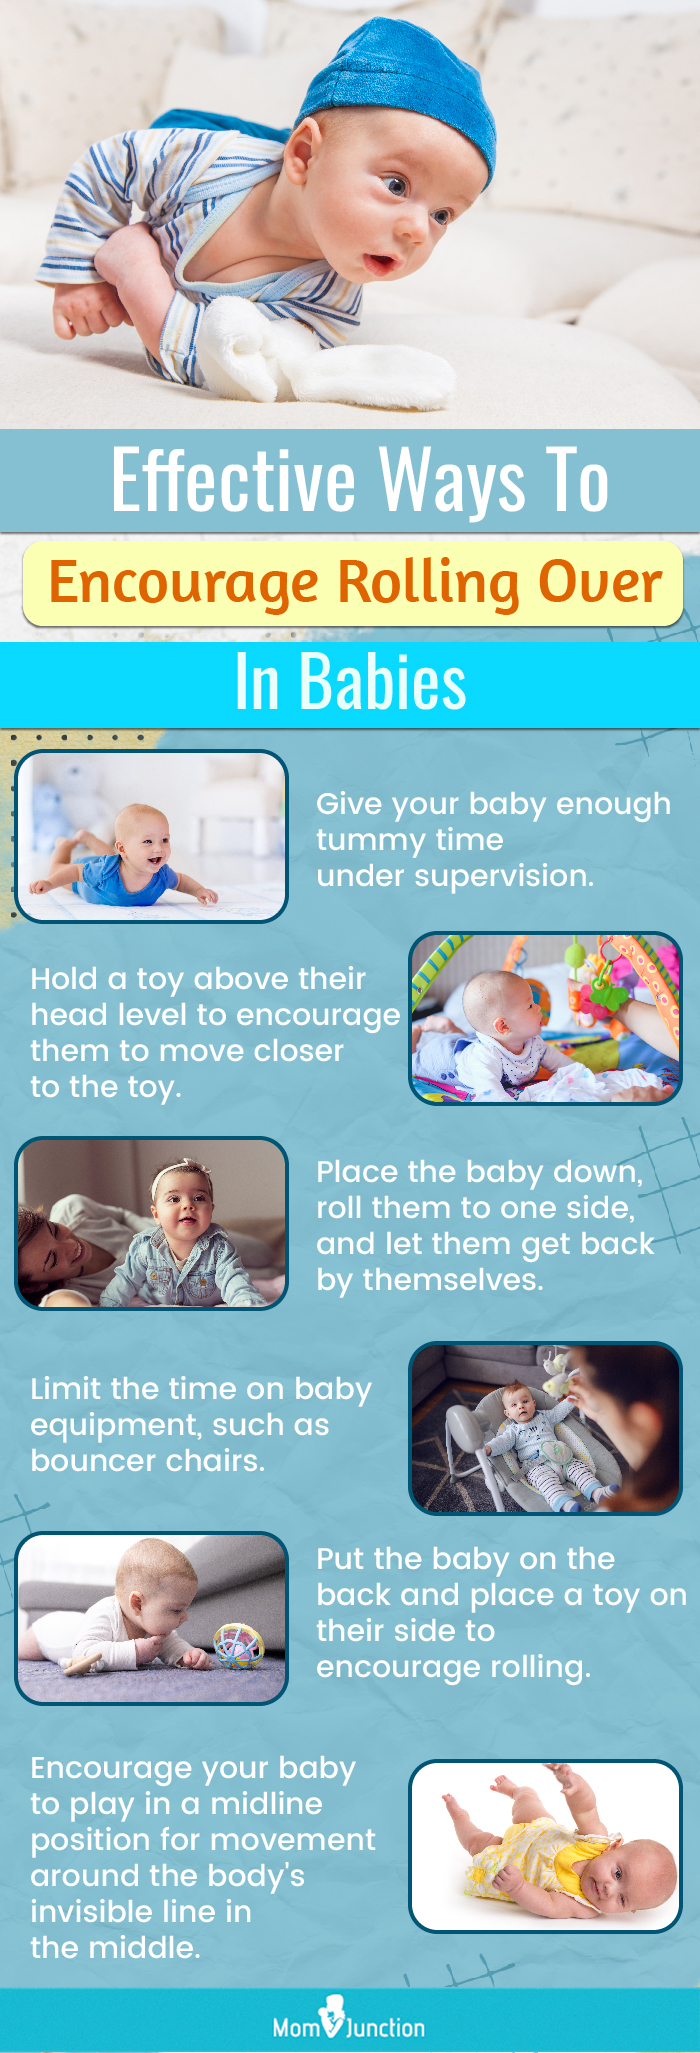 Tummy Time for Baby: How to Do It, When to Start and Why It's